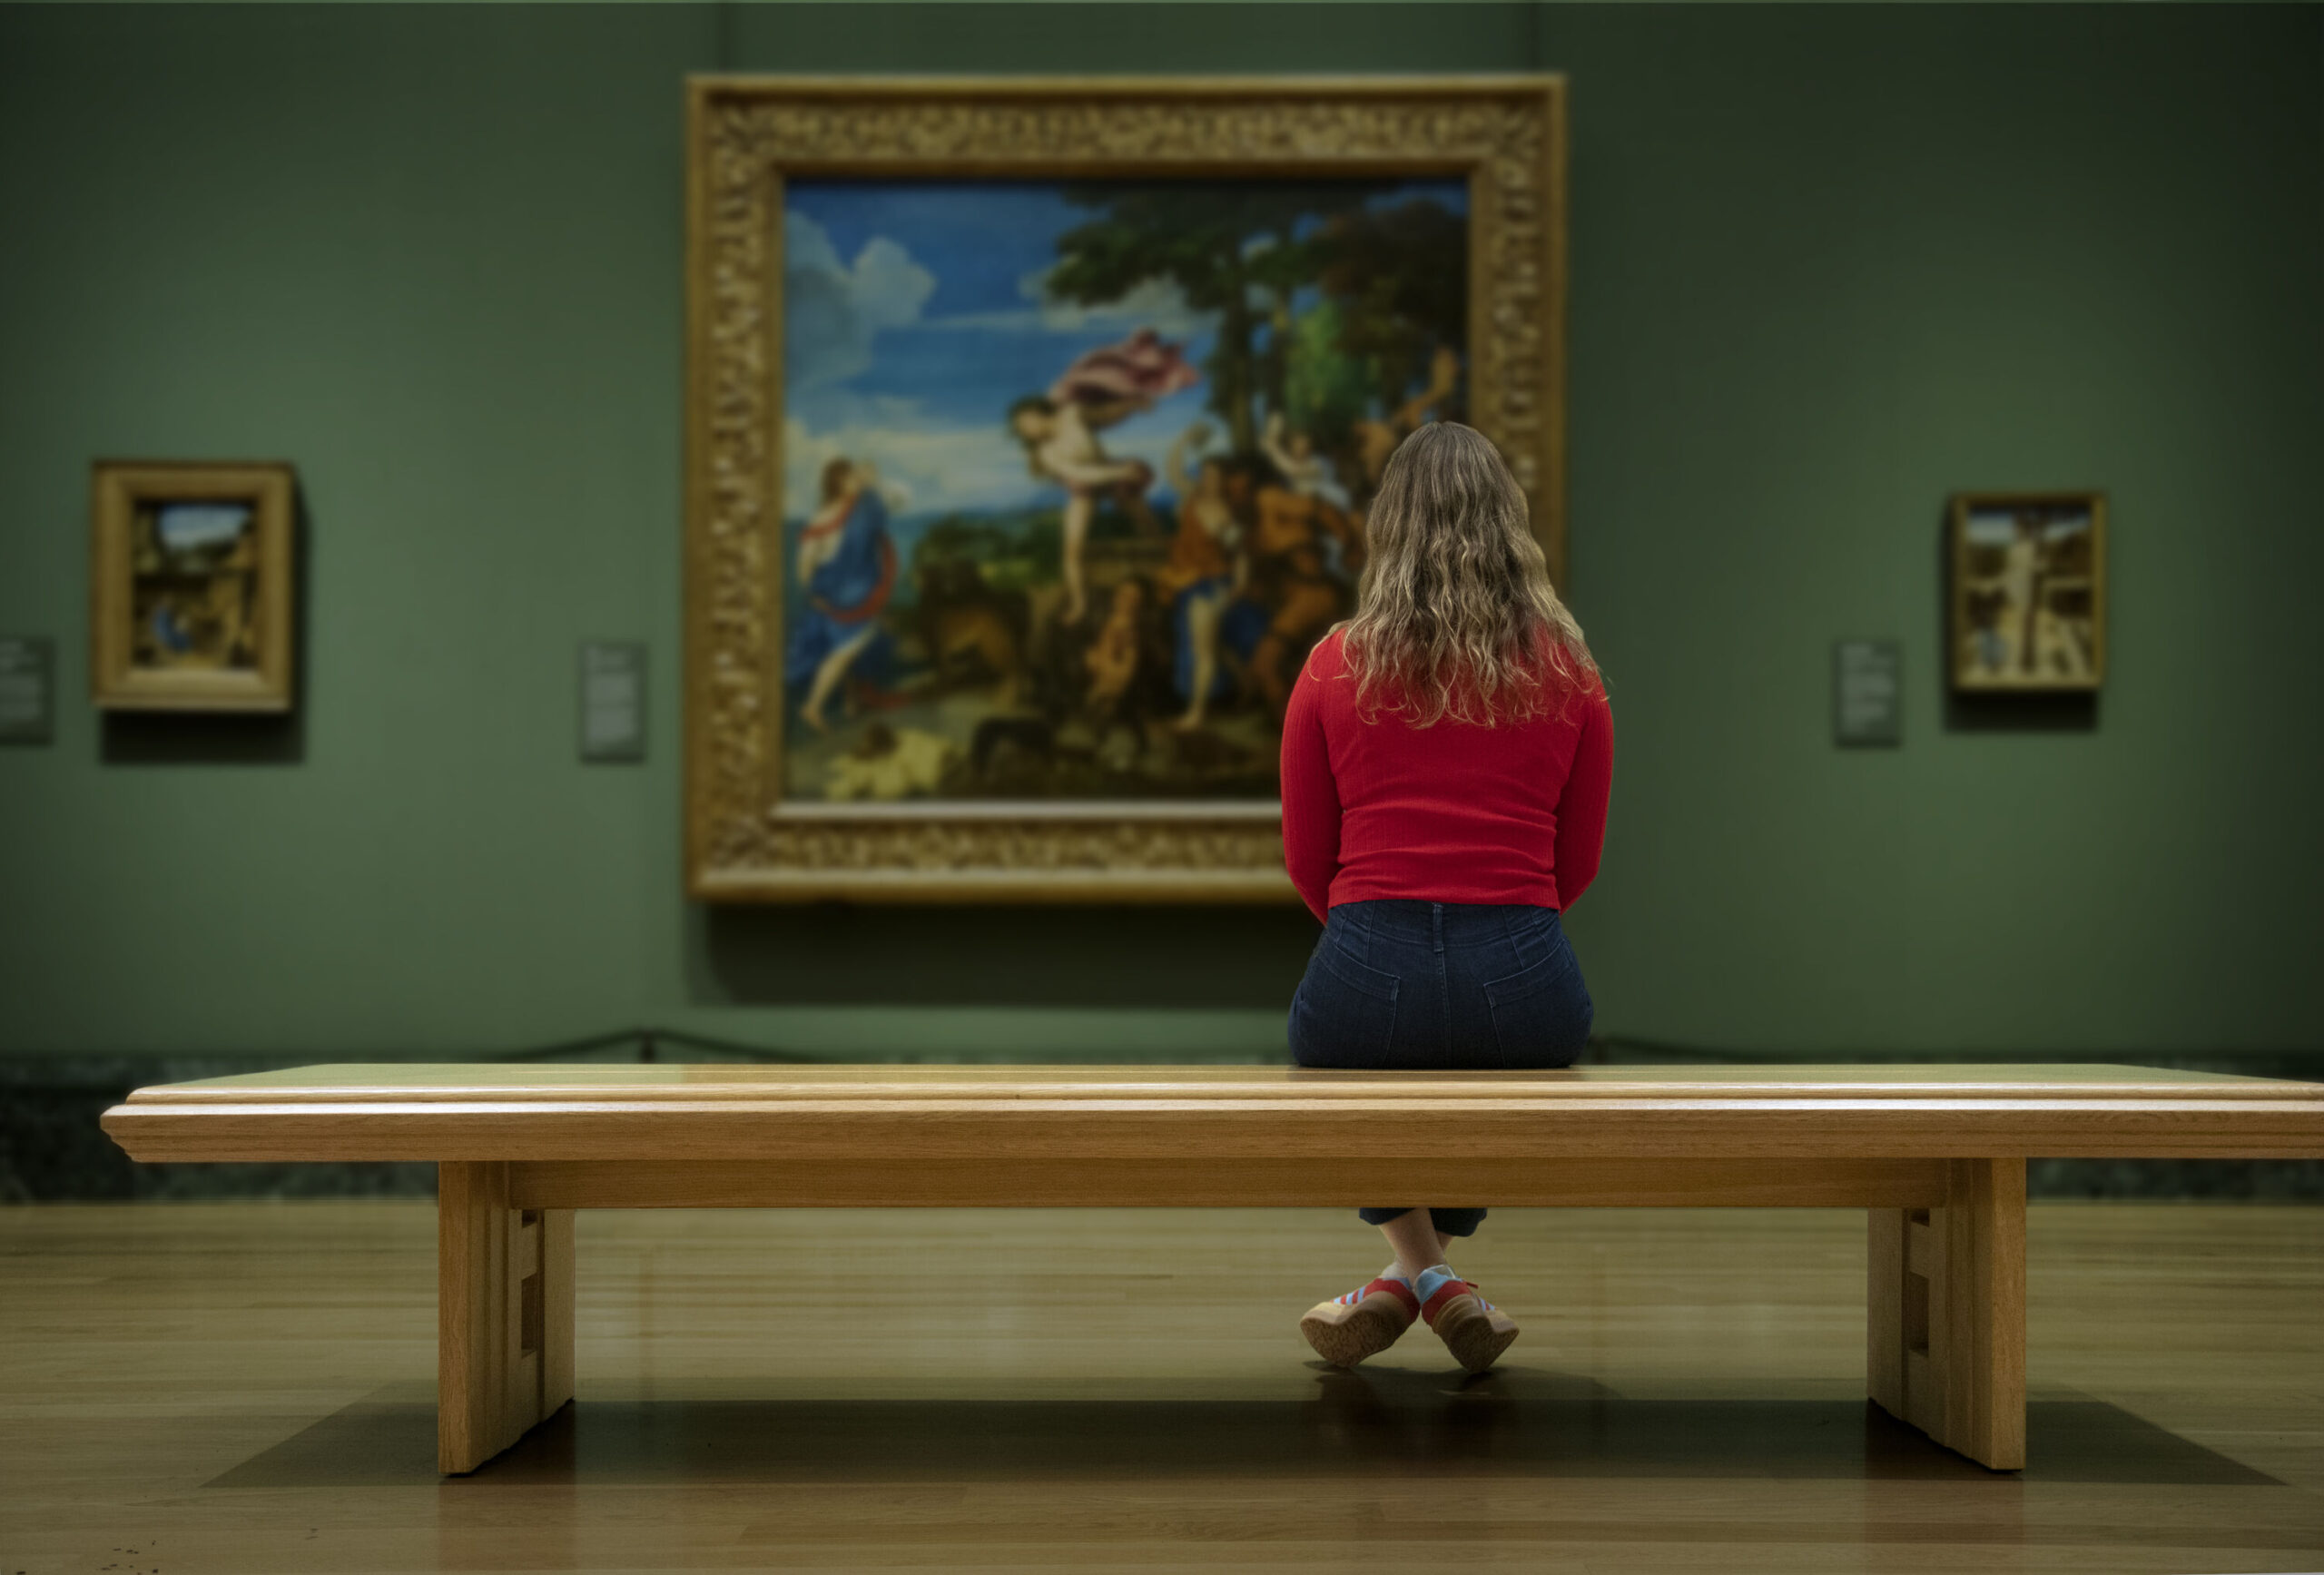 Exhibition on Screen: My National Gallery (12A)